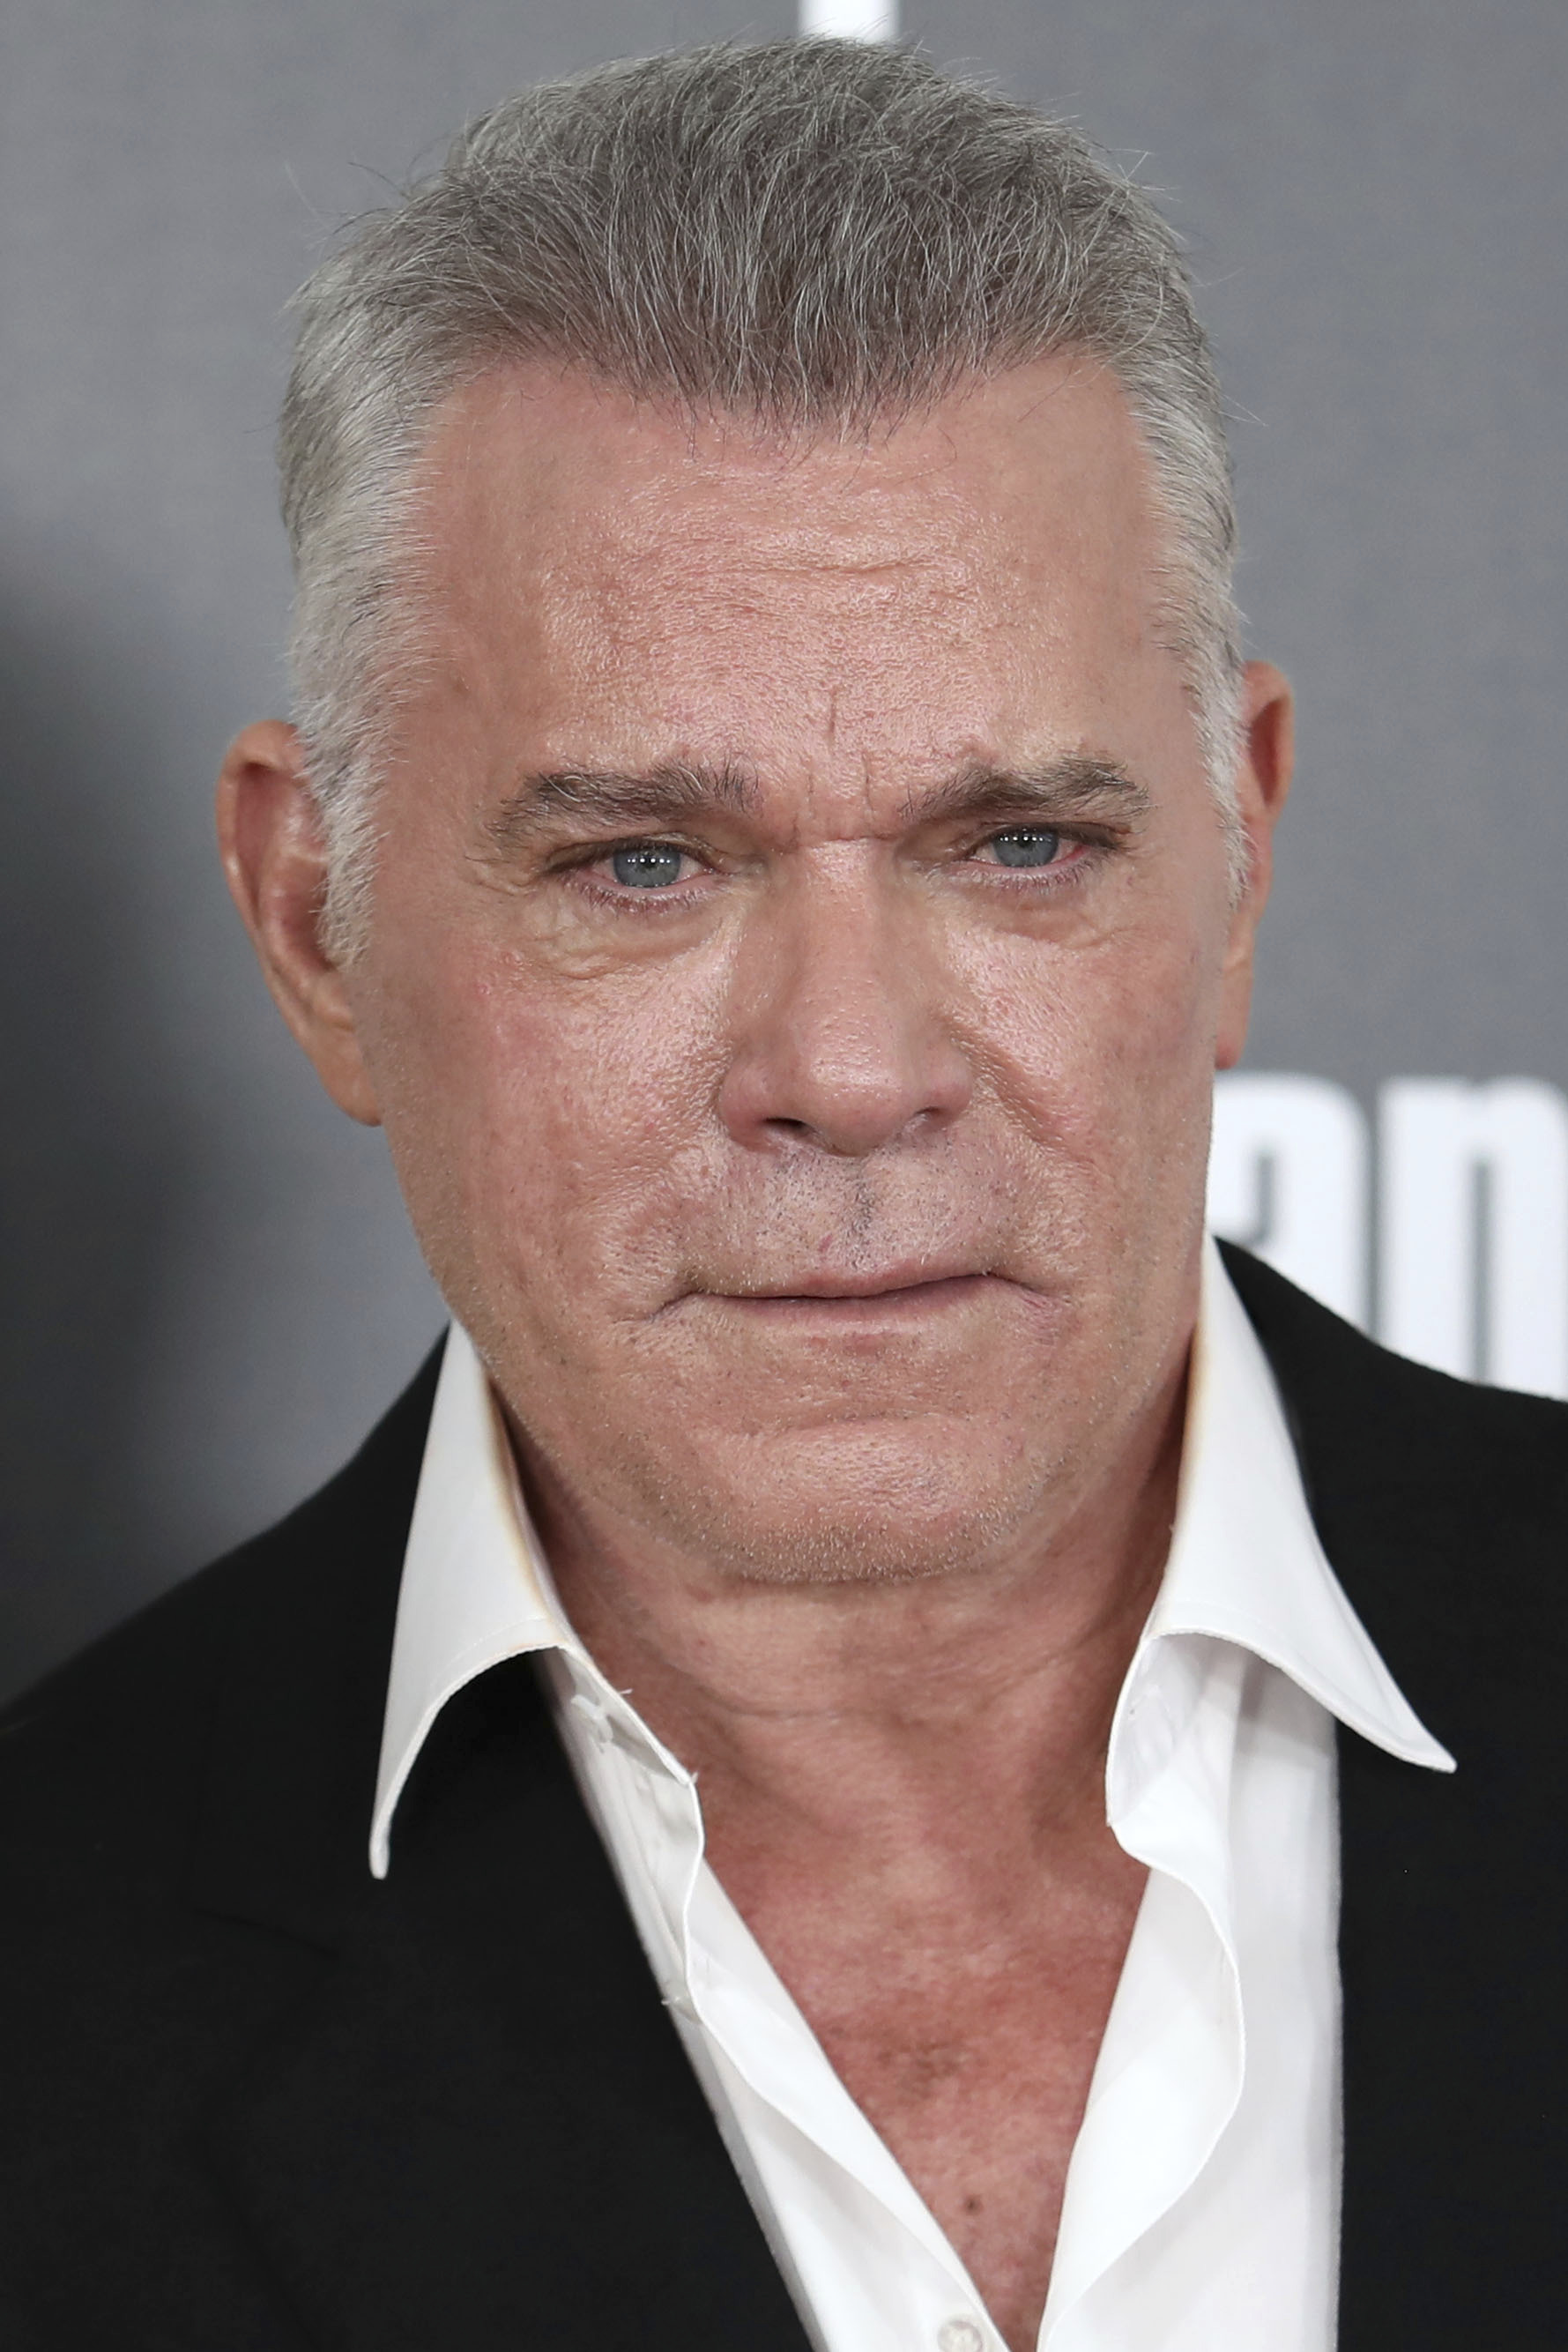 Field of Dreams' Actor Ray Liotta - 'Shoeless Joe' - Dead at 67 - Sports  Illustrated Texas Rangers News, Analysis and More